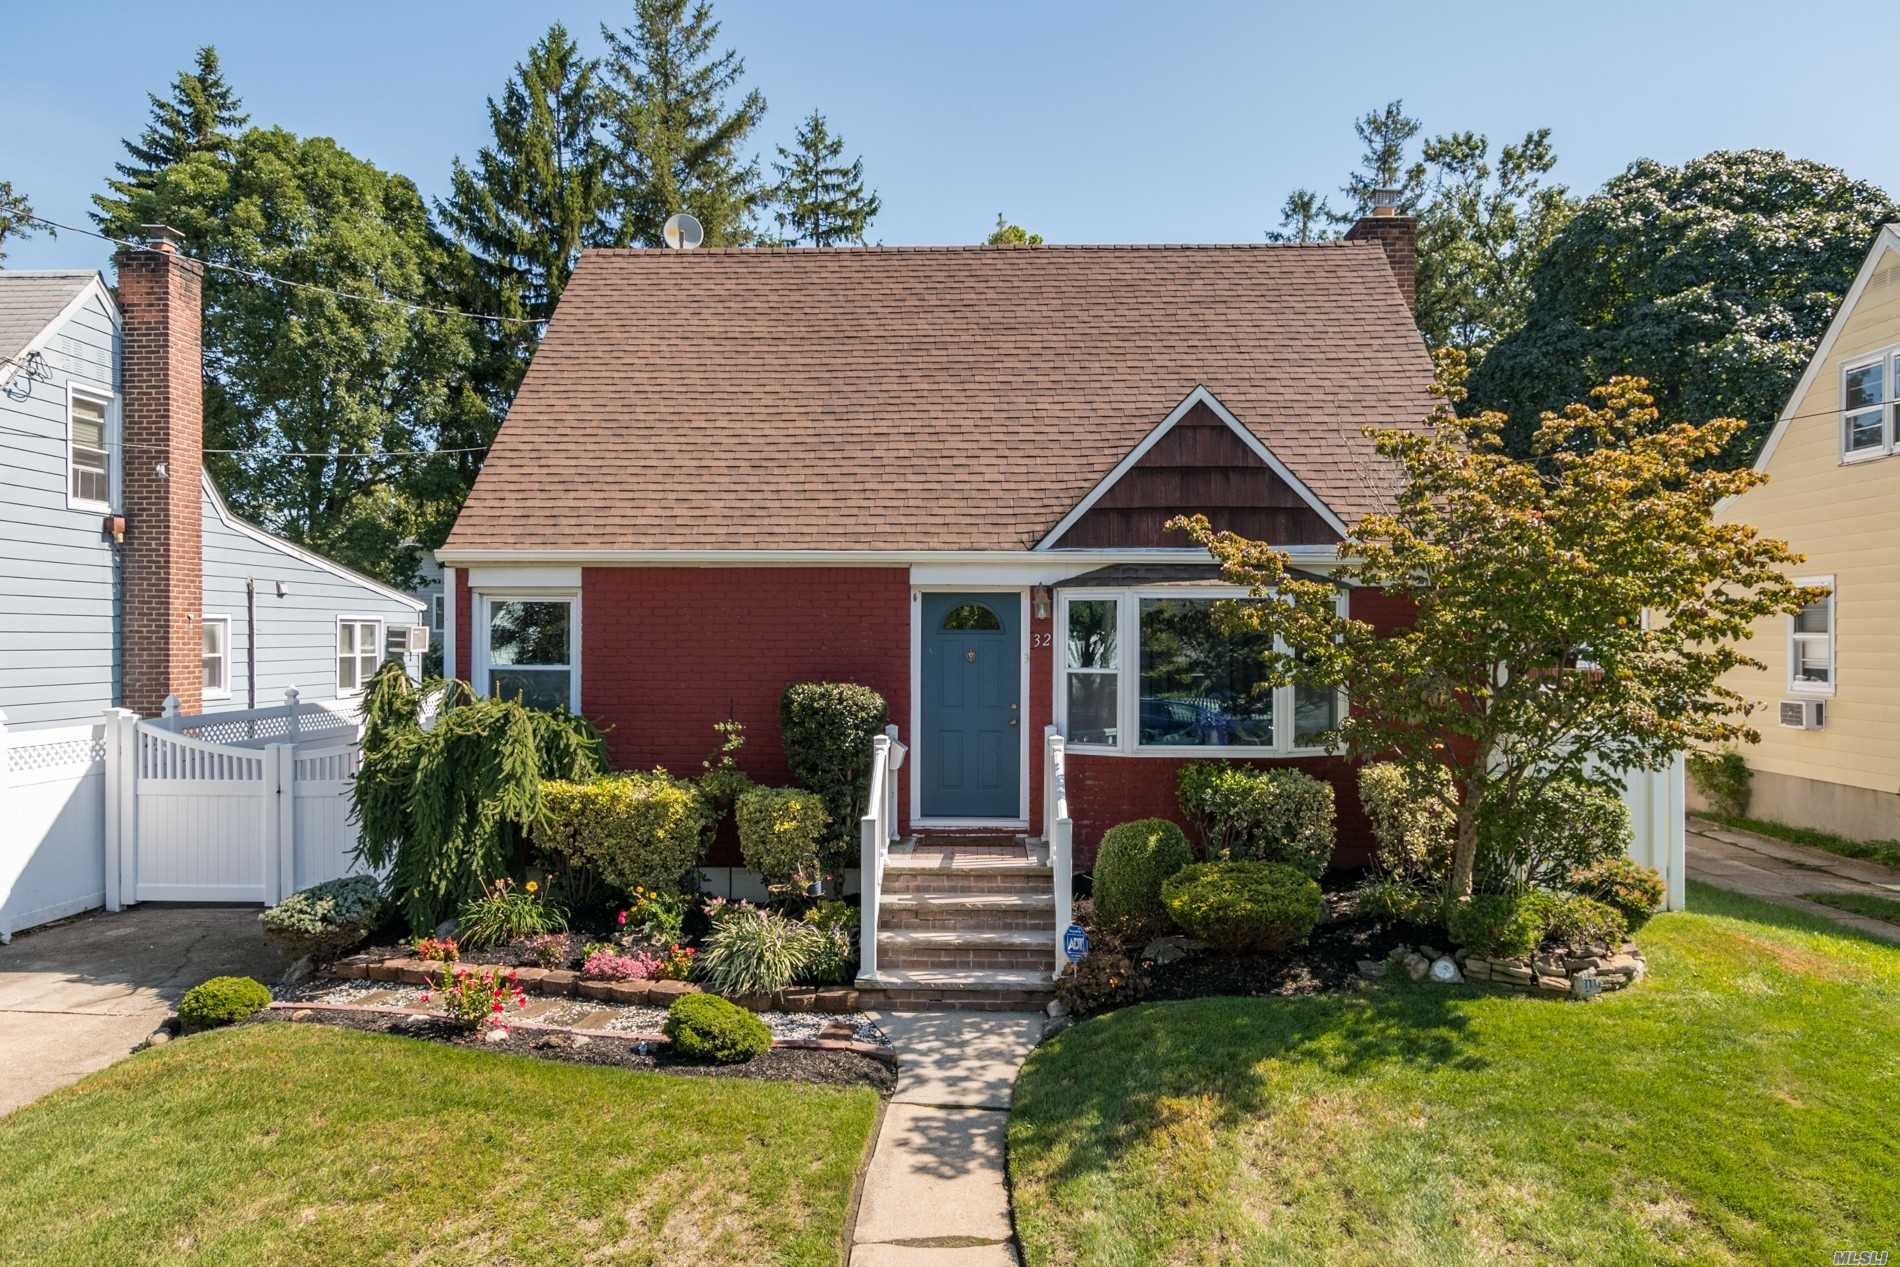 3 bed 2 bath move in ready cape with a finished basement  beautiful 2 outdoor enclosed sun rm Hot tub , steam shower all new windows with 4 ductless units with many more updates ! beautiful landscaping  centrally located close to shopping and the train